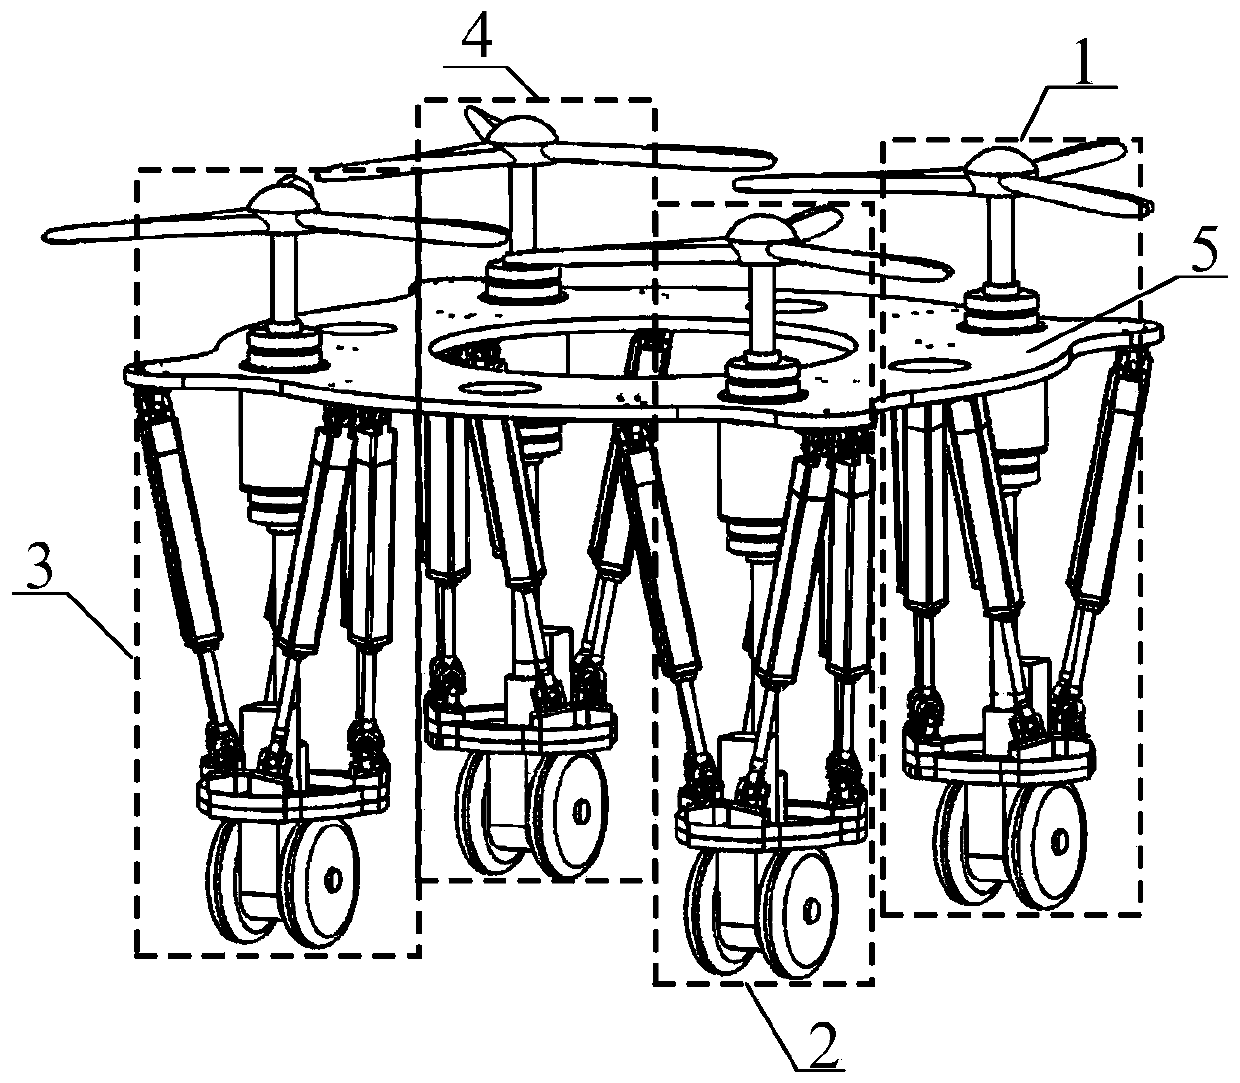 Air-ground integrated electric parallel-connection type wheel-foot driving mechanism